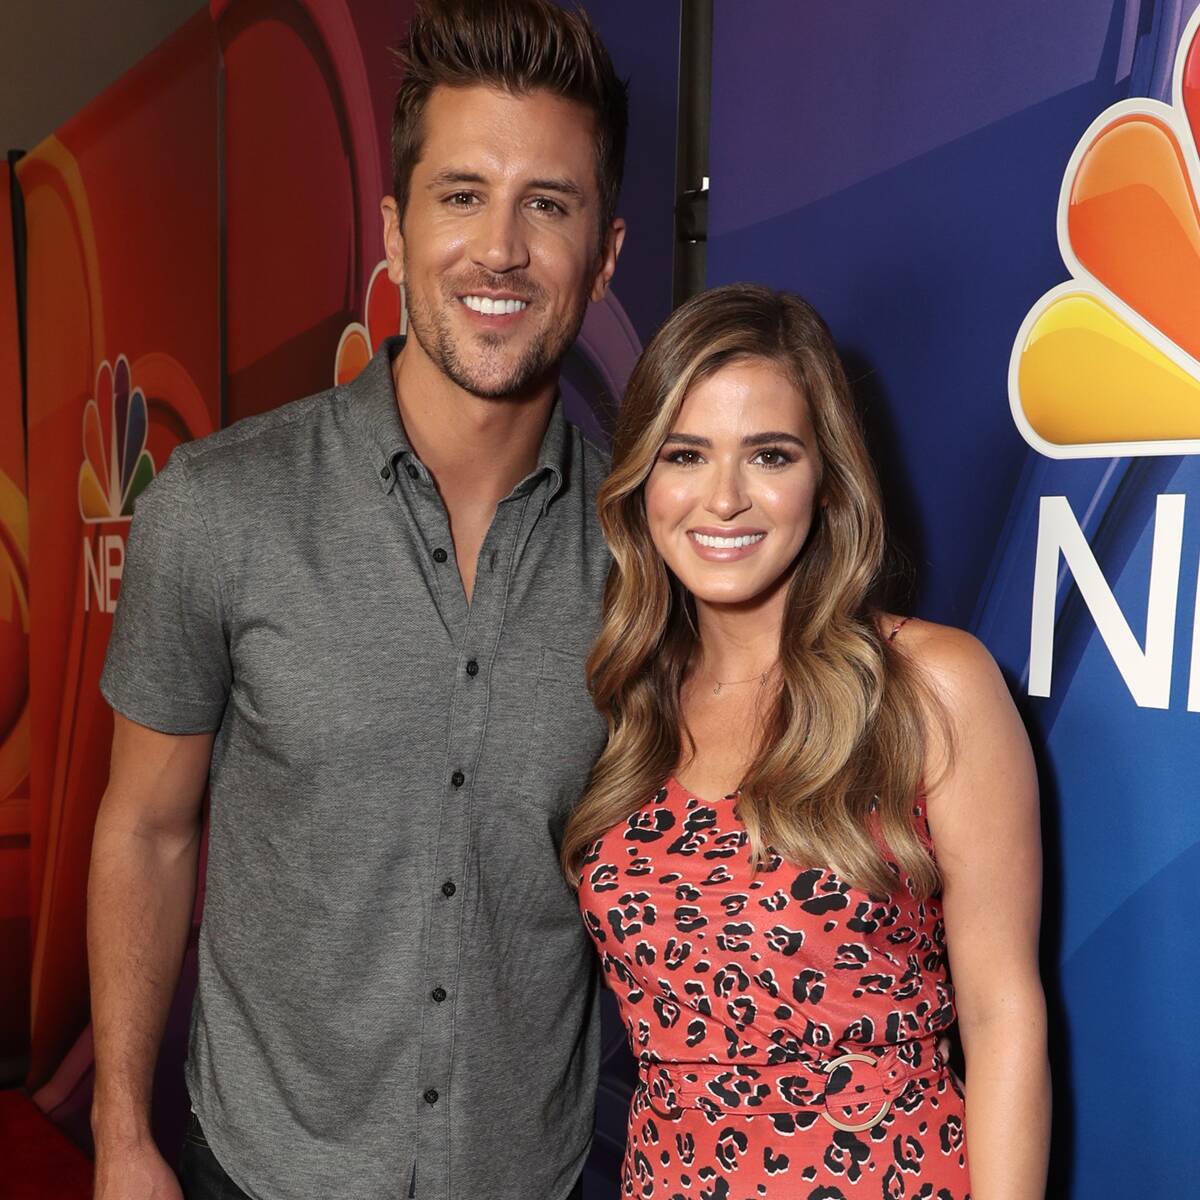 Bachelor Nation's JoJo Fletcher Calls Out "Misleading" Report About Her Relationship With Jordan Rogers